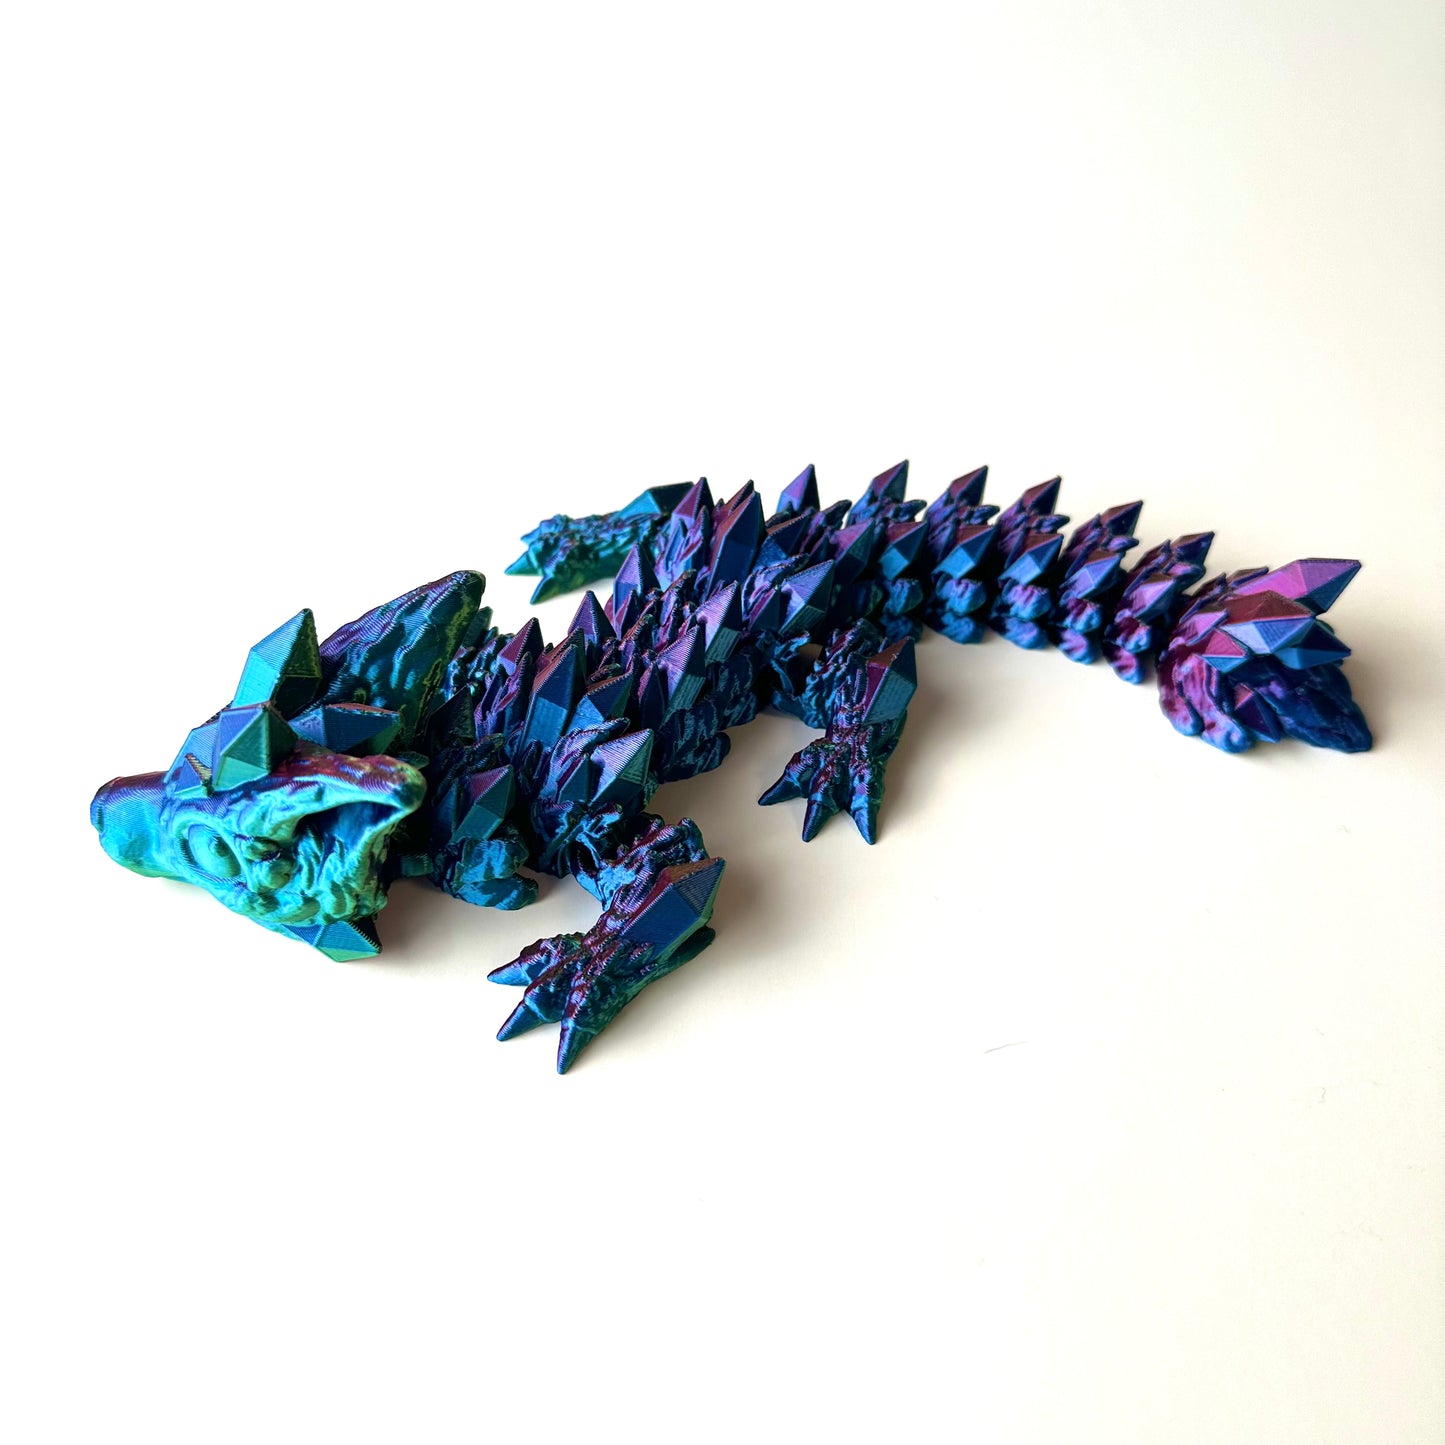 Baby Wolf Dragon - 3D Printed Articulating